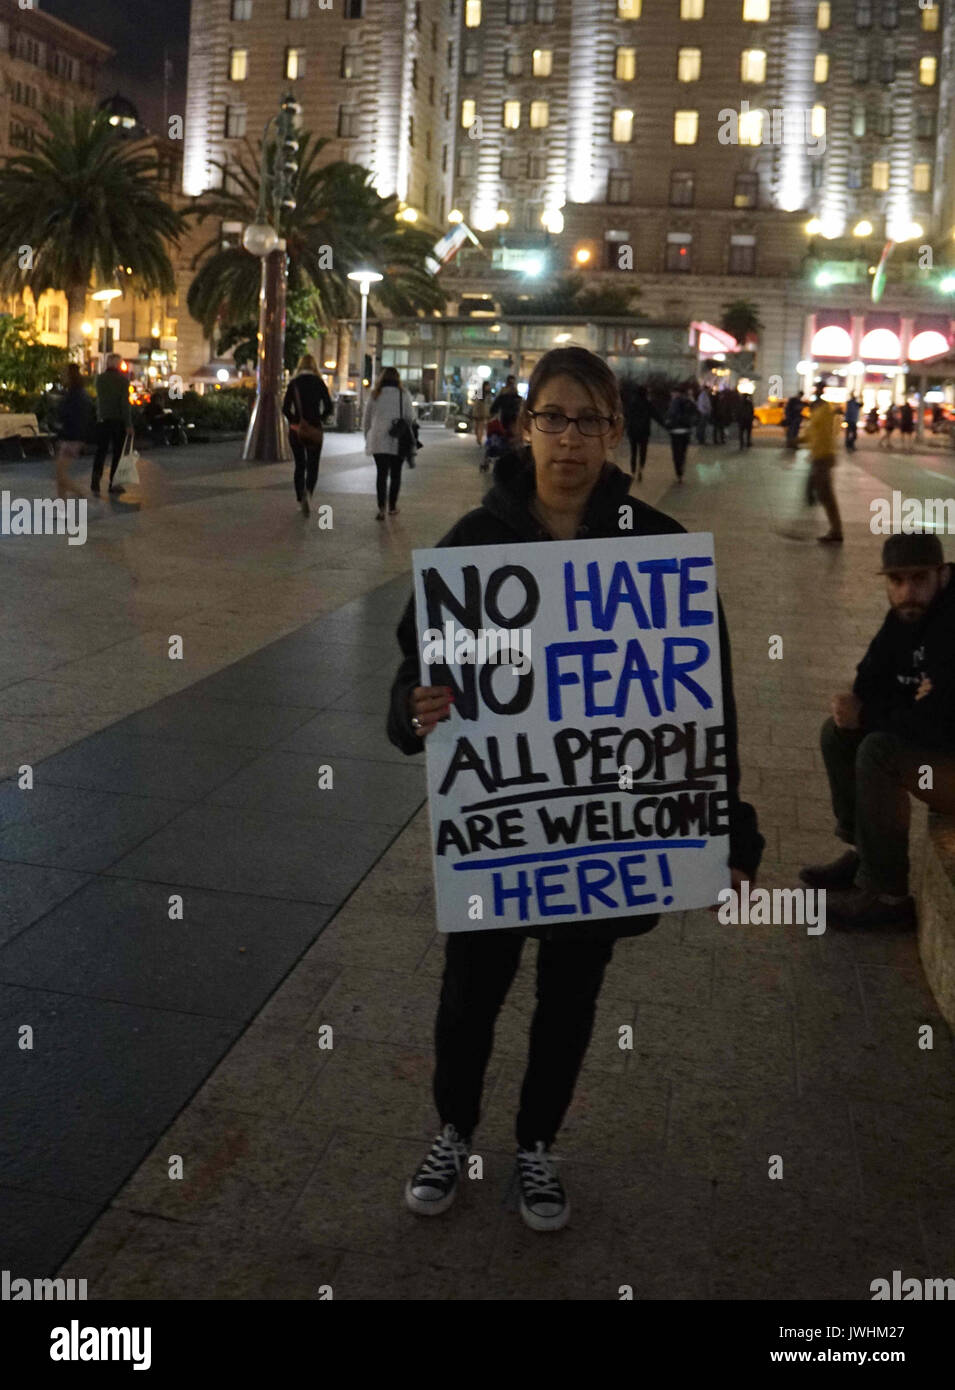 San Francisco, USA. 12th Aug, 2017. A woman holding a sign reads 'No Hate No Fear All People Are Welcome Here' take part in a candle light vigil in downtown San Francisco, the United States, on August 12, 2017. Three people were killed and 19 wounded in Charlottesville, as a supporter of the so-called alt-right movement rammed his car into a crowd of protesters against a white nationalist rally. Then, a local group known as Indivisible SF, short for San Francisco, called for the vigil 'to stand in solidarity with Charlottesville.' Credit: Xu Yong/Xinhua/Alamy Live News Stock Photo